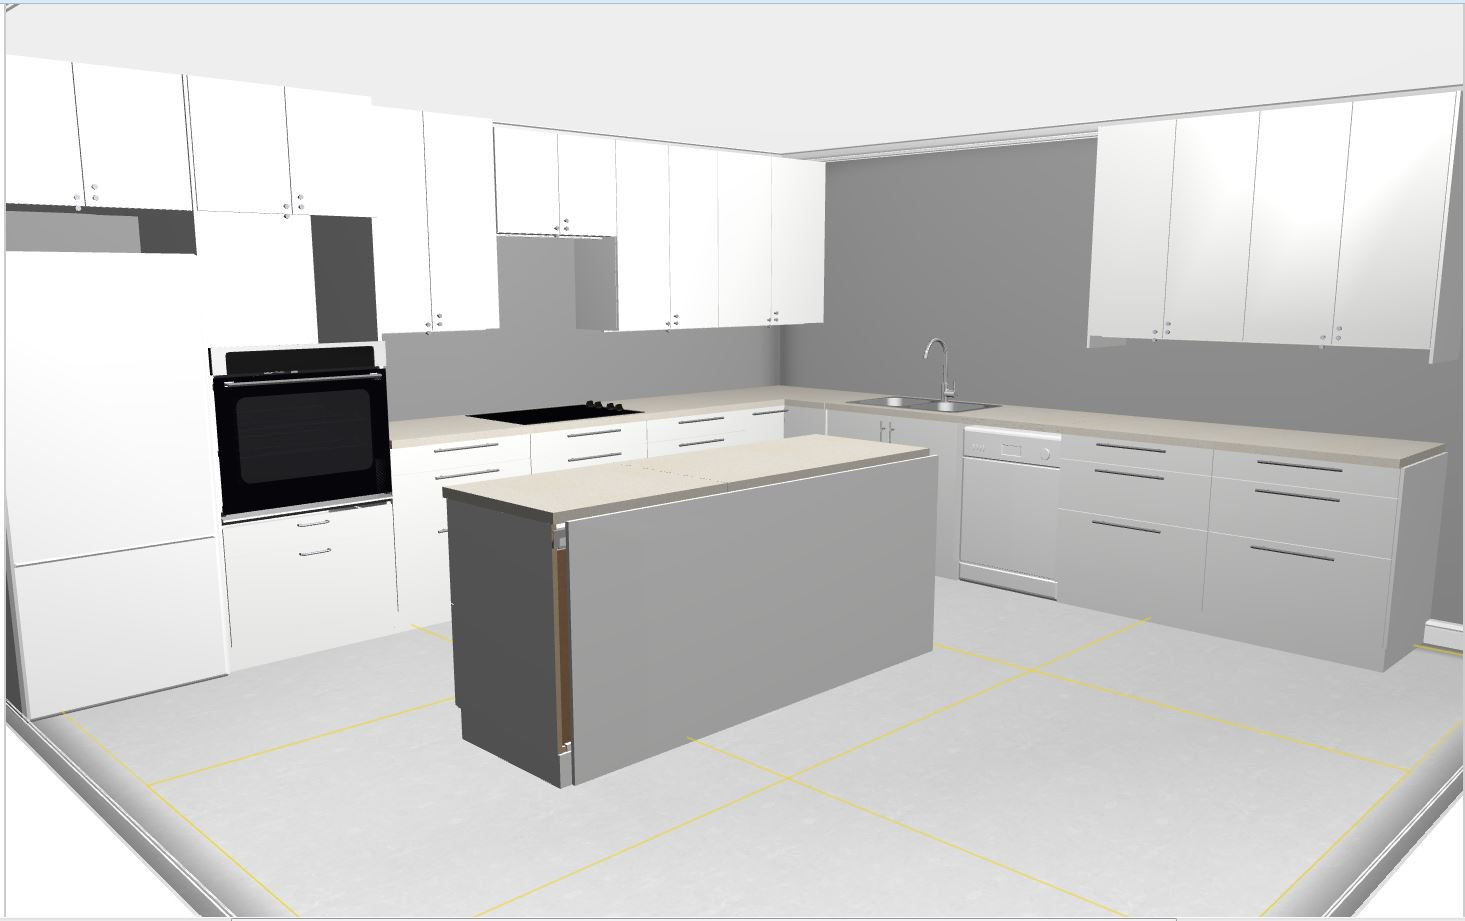 Kitchen Remodel Planner
 How is IKD s IKEA Kitchen Design Better than the Home Planner